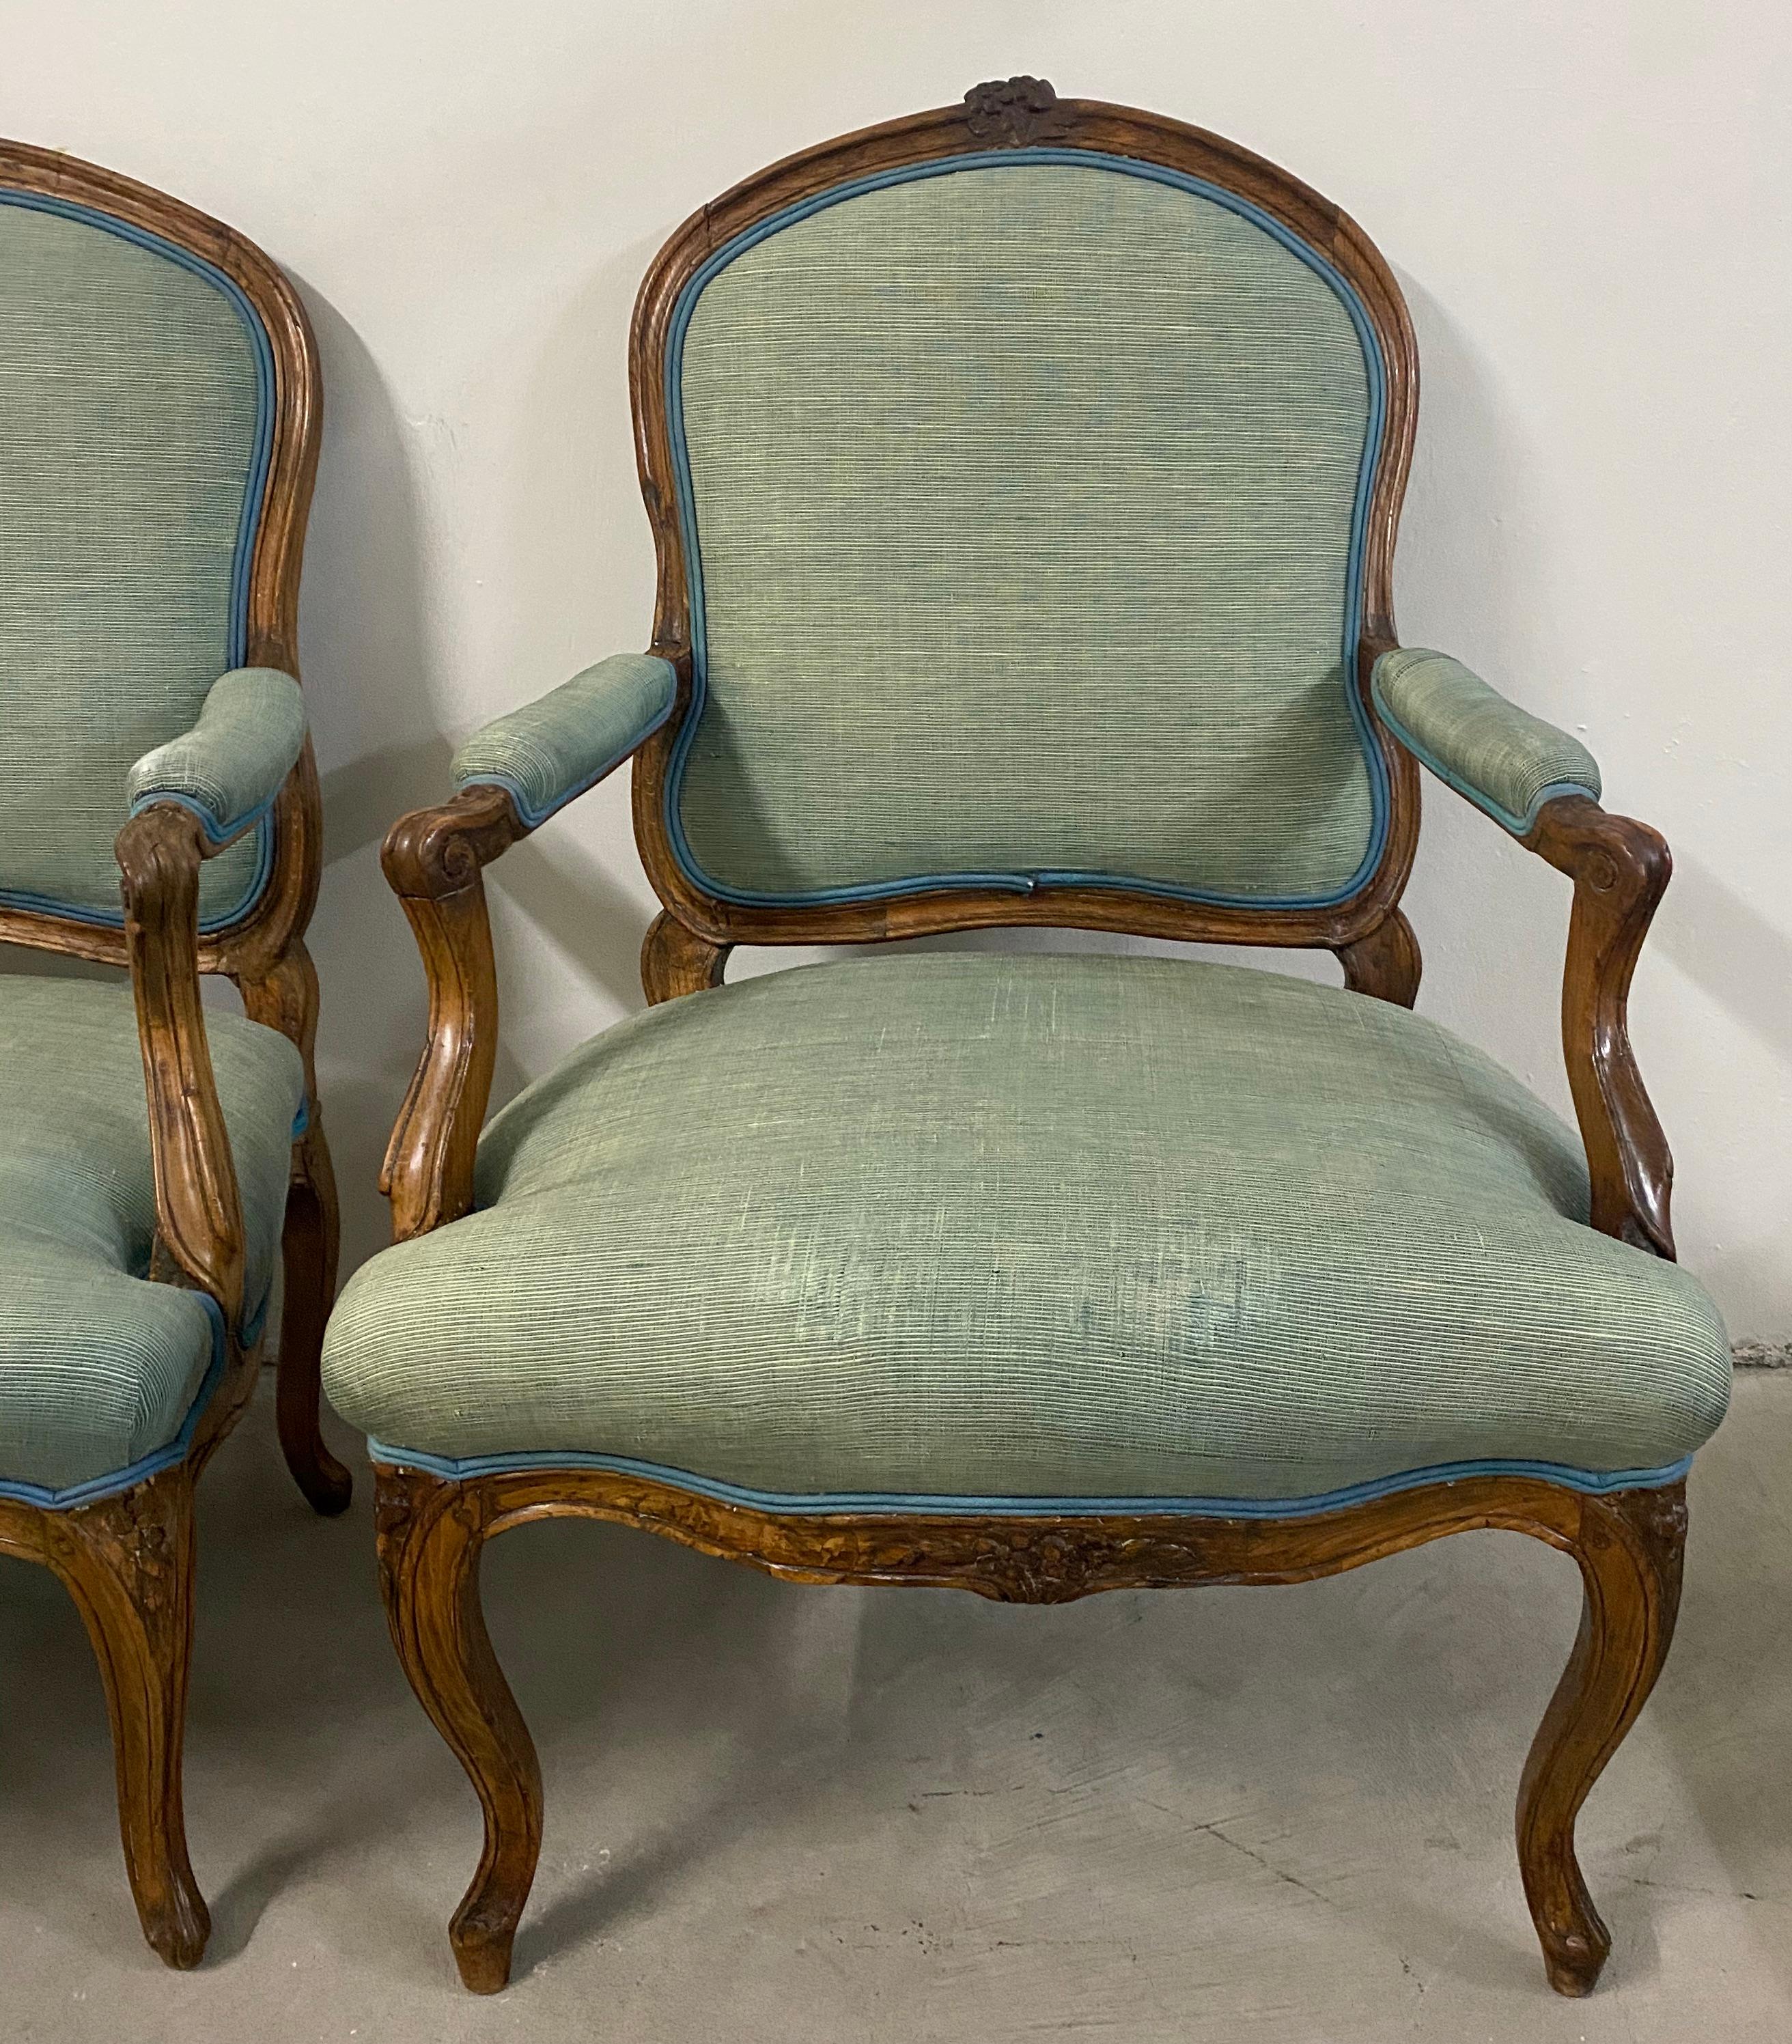 18th century pair of French Louis XV carved walnut armchairs

The chairs currently have a lightly distressed green linen fabric. Easily replaced.

Measures: 26